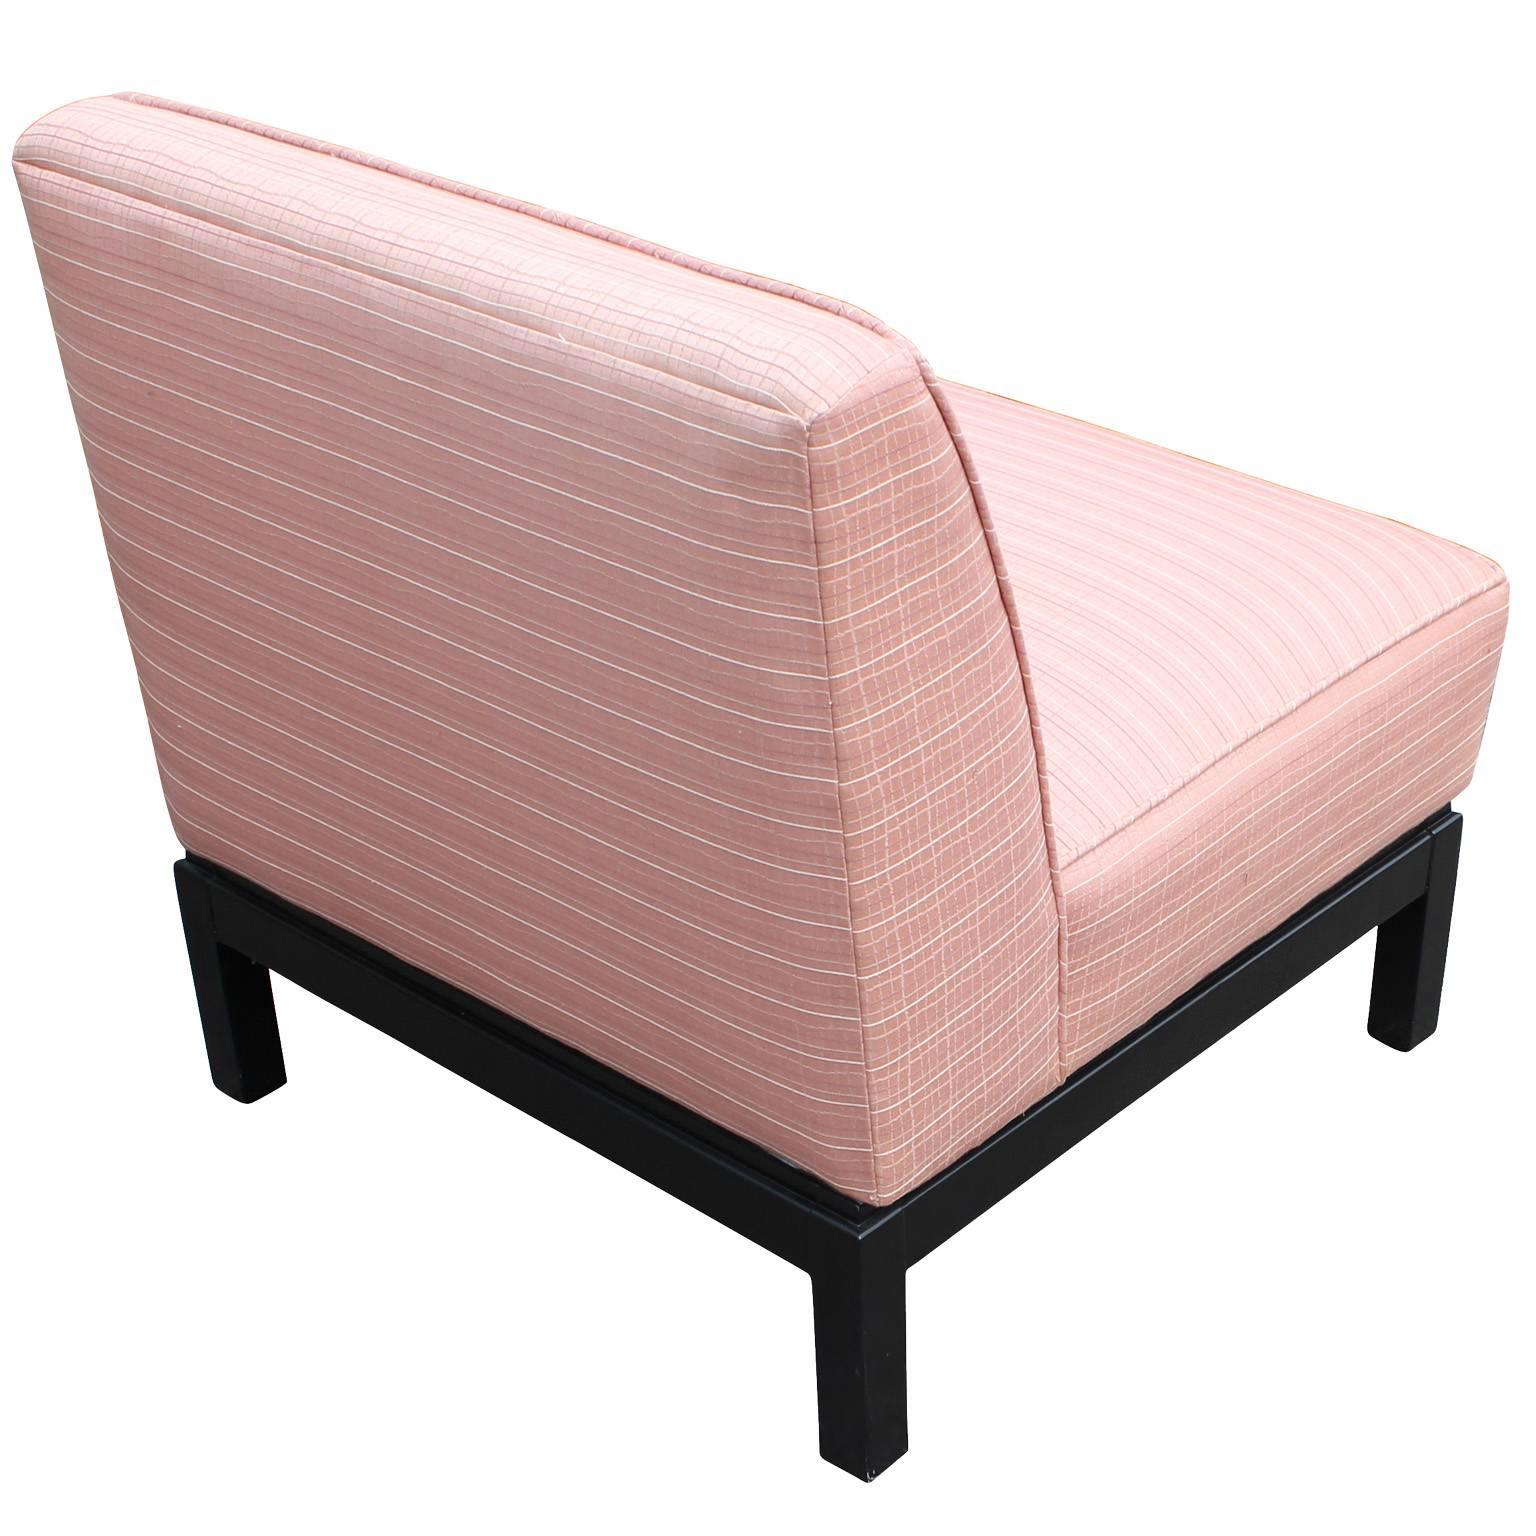 Mid-20th Century Pair of Clean Lined Modern Slipper Chairs in Light Pink with Deep Walnut Bases